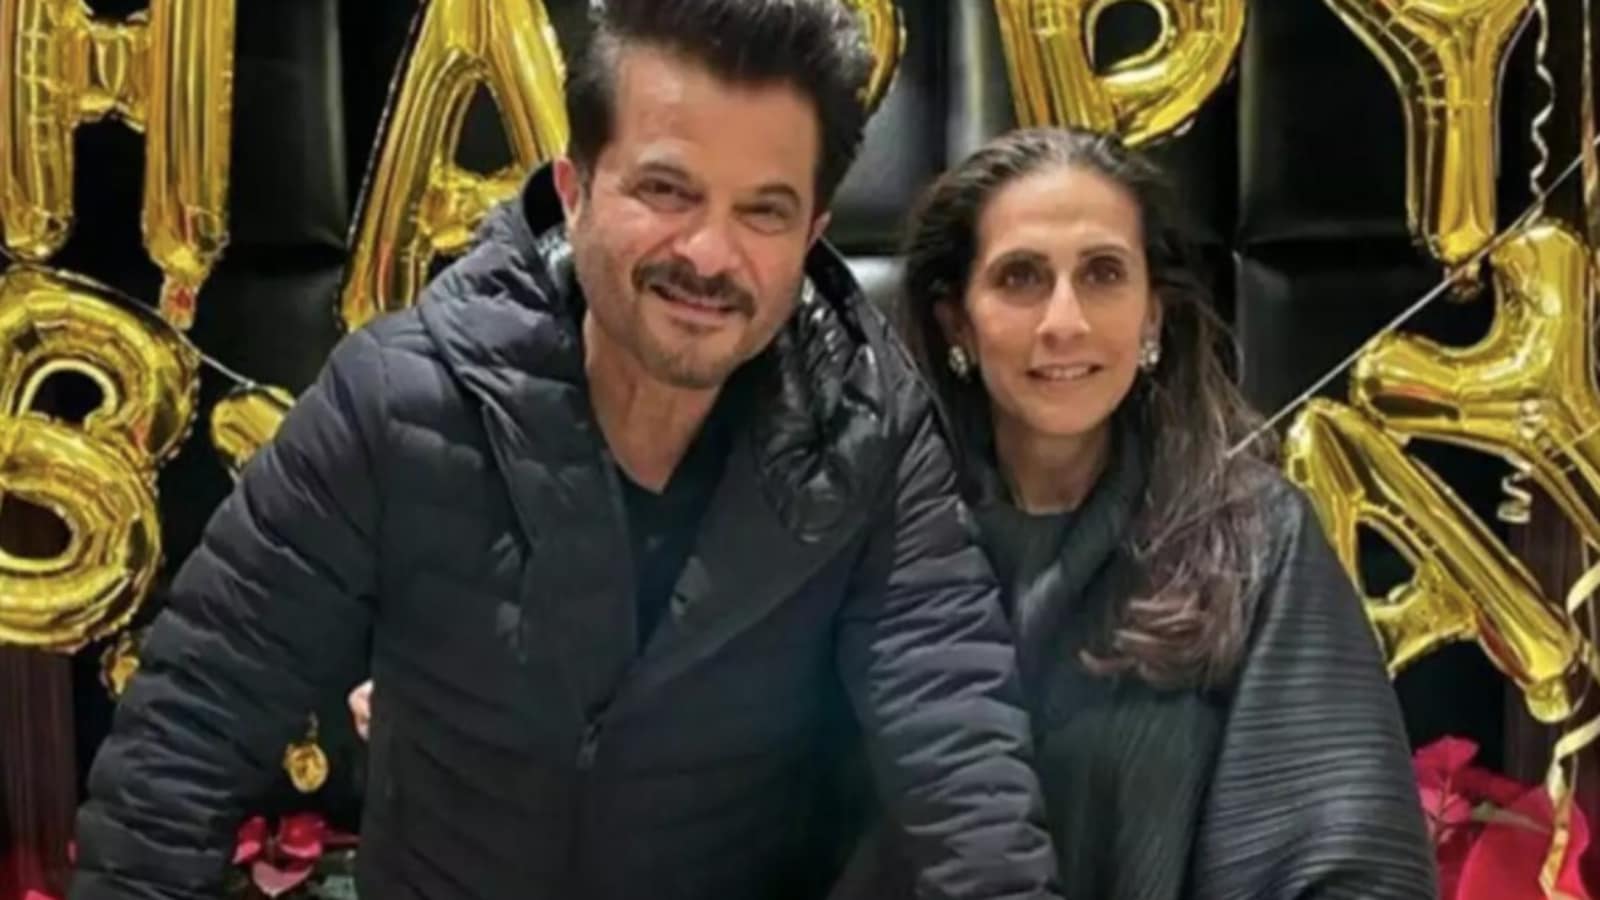 Carina Kpor Sxs Video - When Anil Kapoor admitted to dating '20-25 girls from the film industry'  before settling down with wife Sunita | Bollywood - Hindustan Times